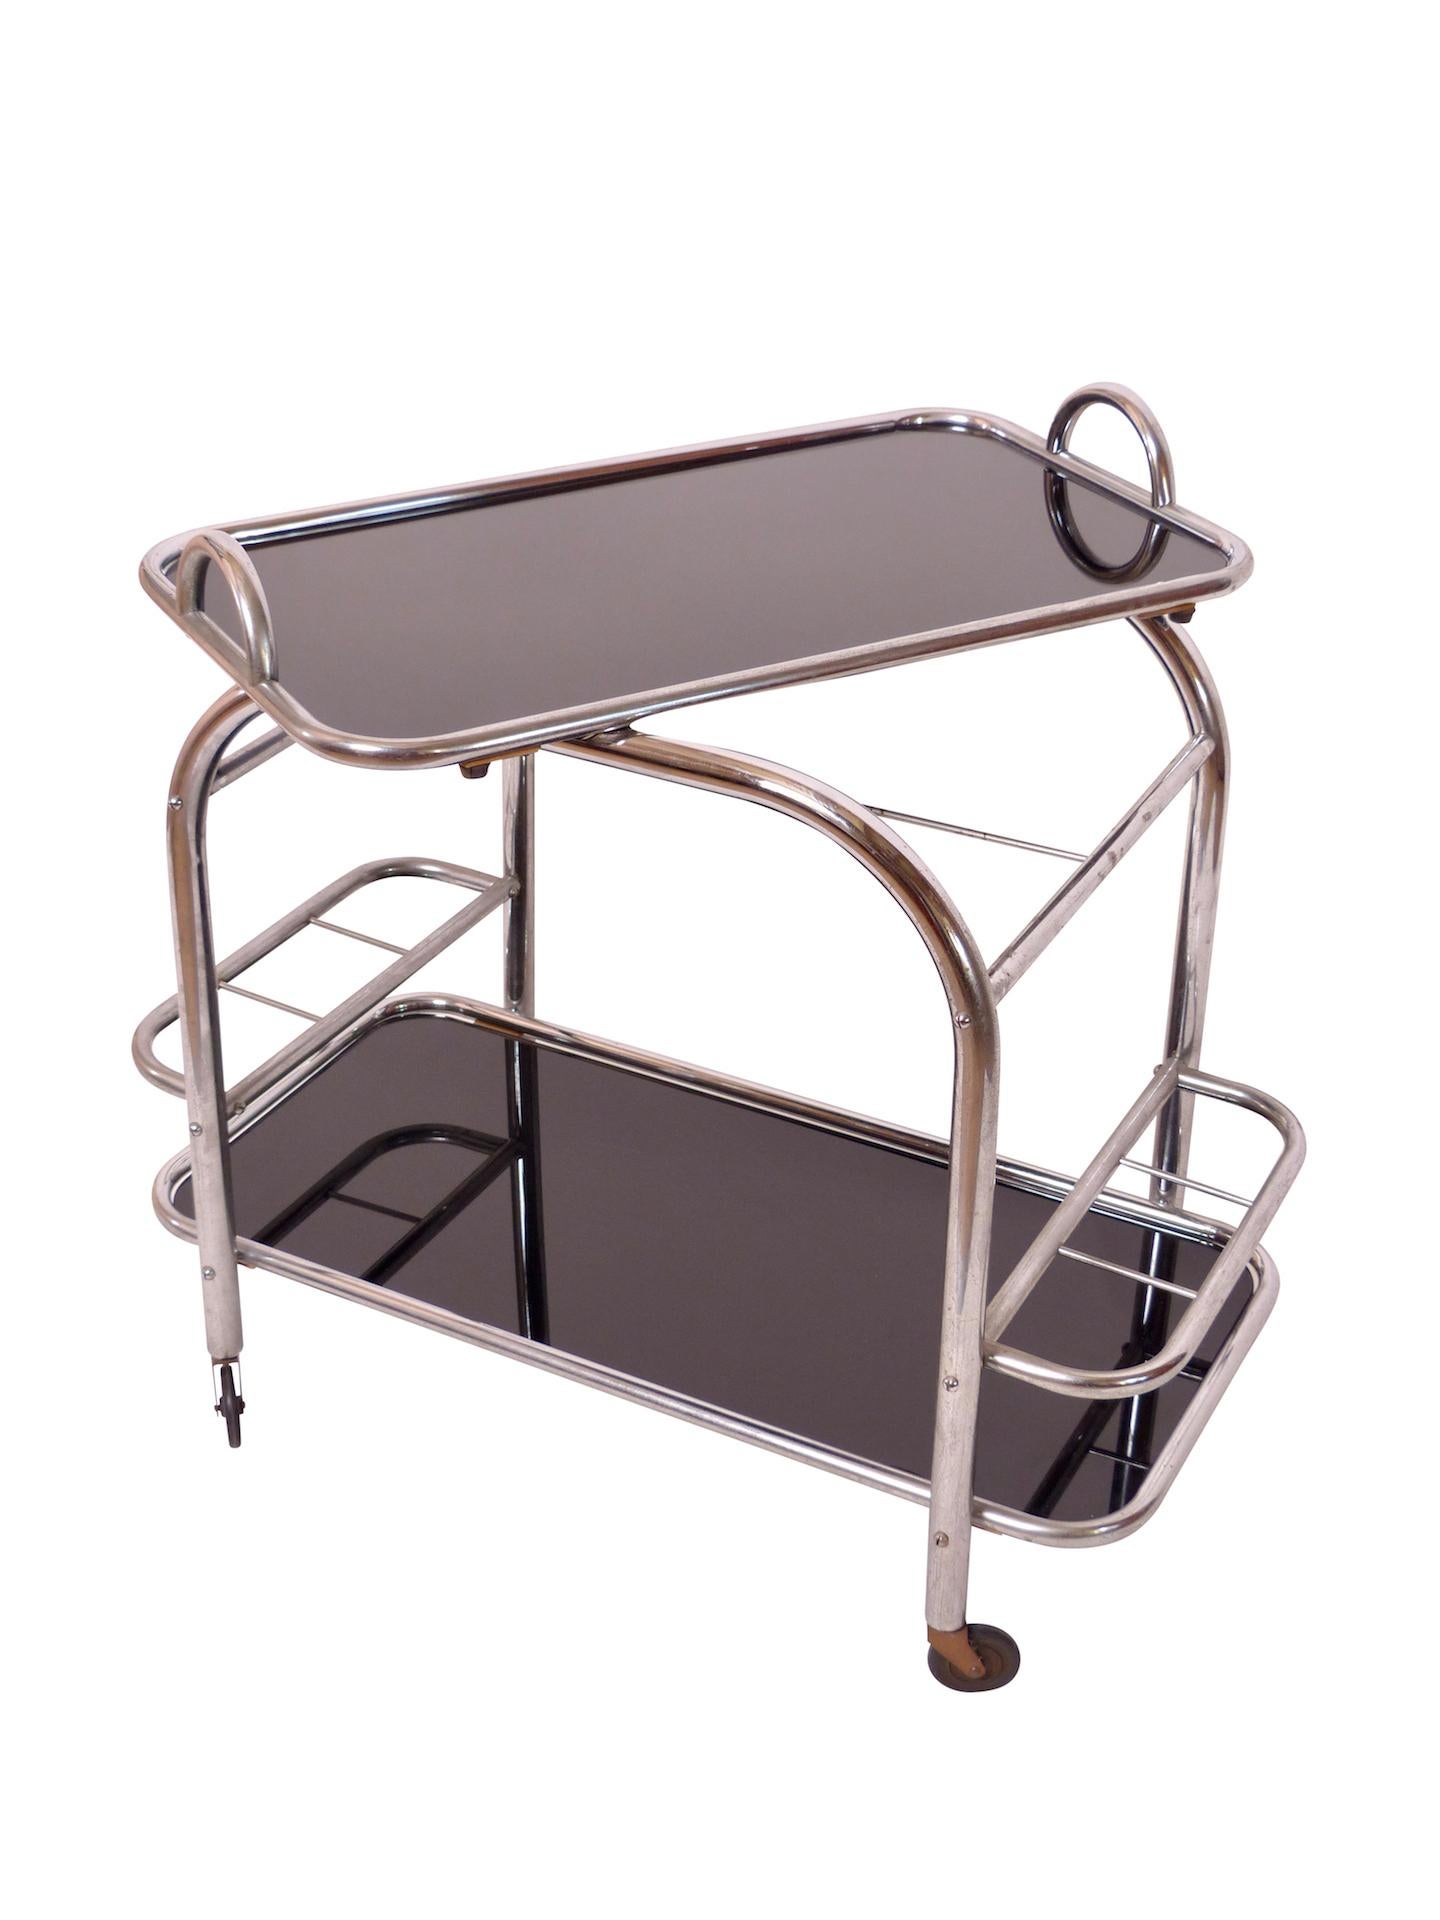 Art Deco bar trolley or tea wagon
Original chrome 
Black glass 
Removable tray 
French Art Deco, 1930s 

Pictures take in a warm lighted ambience. 
Surface is chromed!